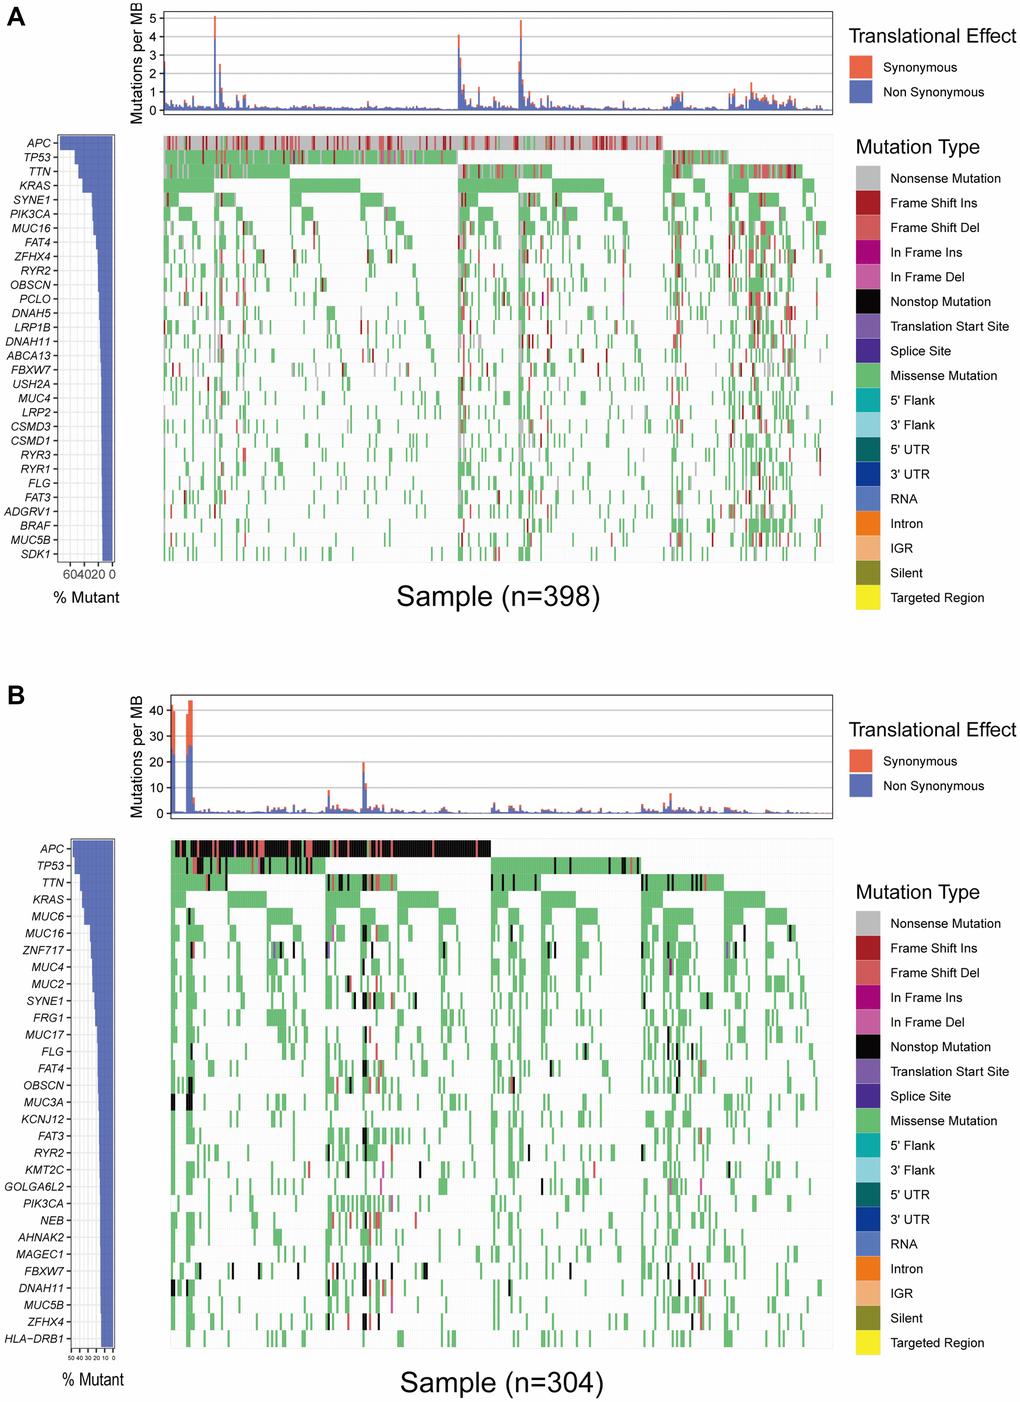 Overview of frequently mutated genes in colon cancer. (A) Waterfall plot shows the frequently mutated genes in colon cancer from TCGA database. The left panel shows mutation frequency, and genes are ordered by their mutation frequencies. The right panel presents different mutation types. (B) Waterfall plot displaying the frequently mutated genes in colon cancer from the ICGC cohort. The left panel shows the genes ordered by their mutation frequencies. The right panel presents different mutation types.